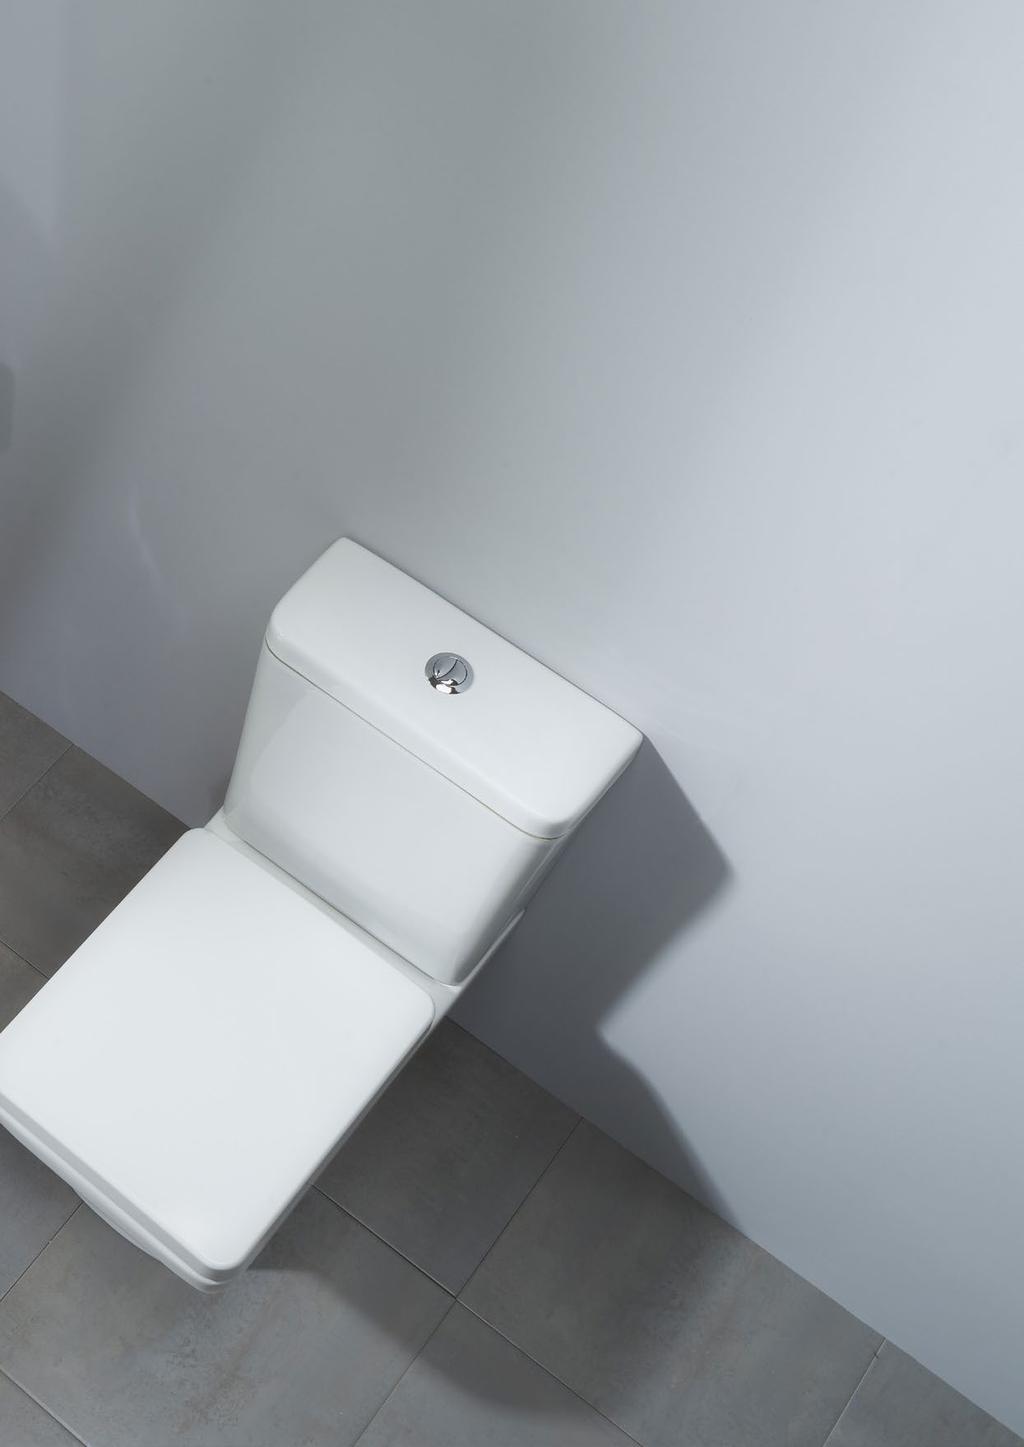 093 Q60 A versatile range of sanitaryware which will LOOK GREAT in any